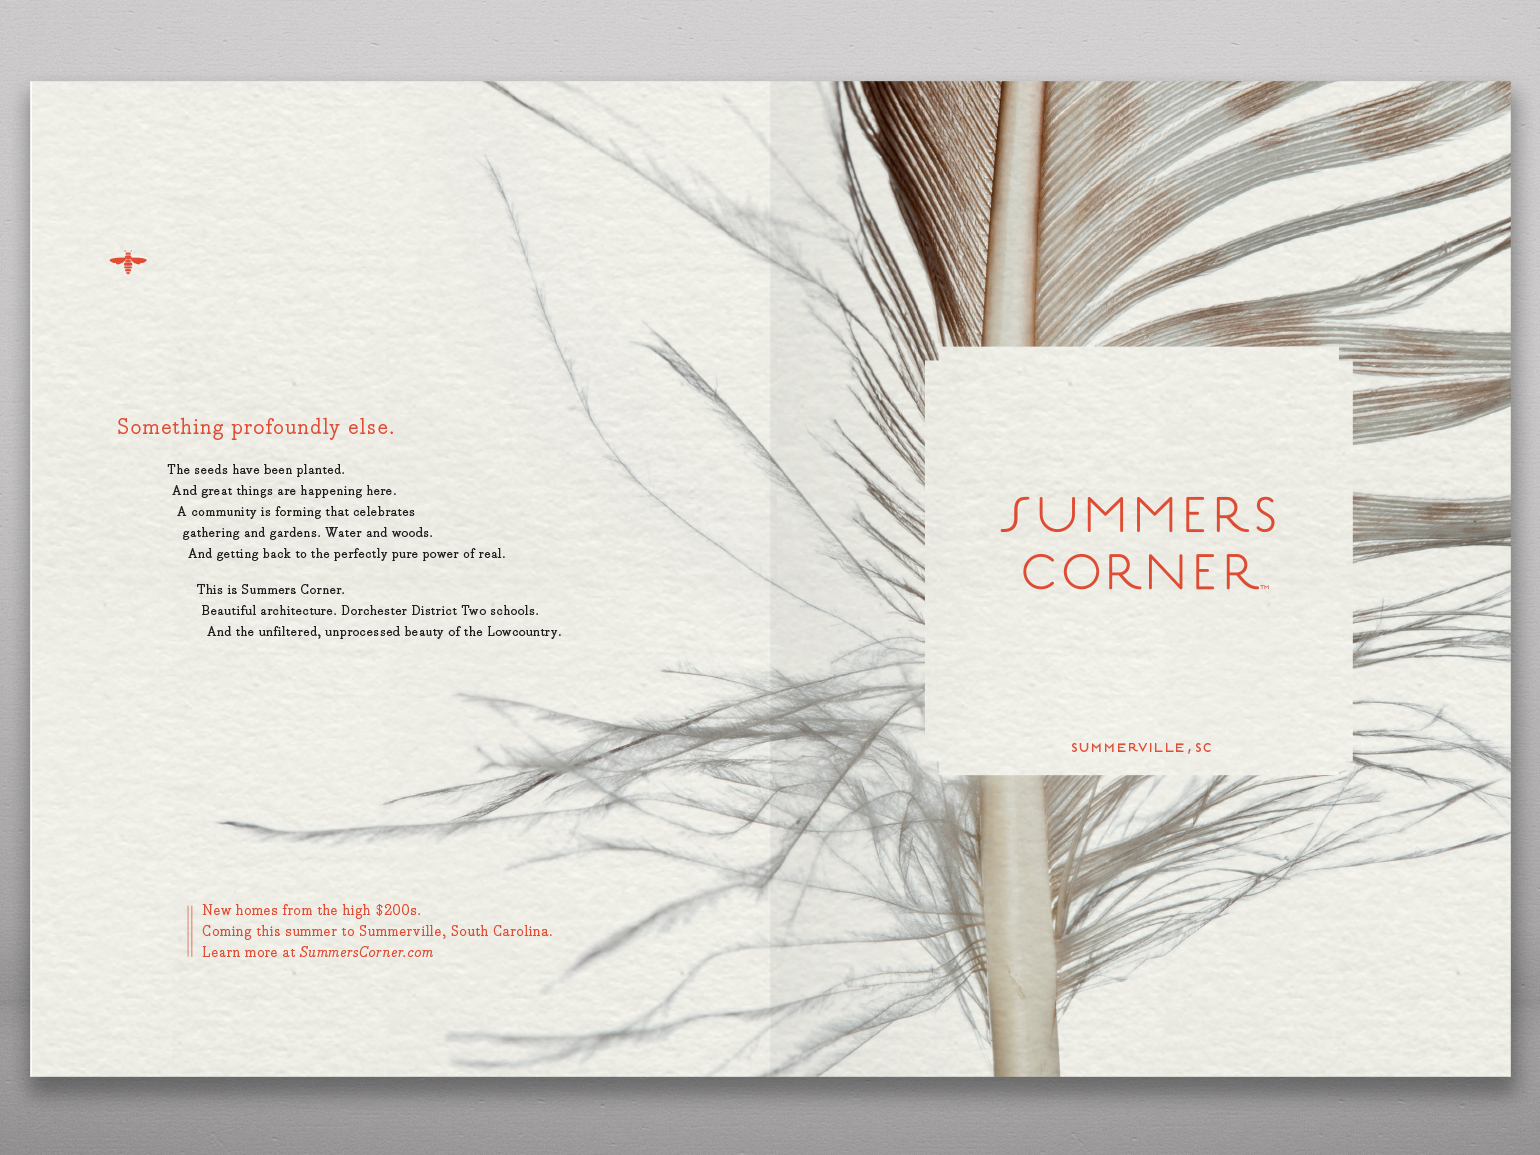 Summers Corner Feather Spread 3